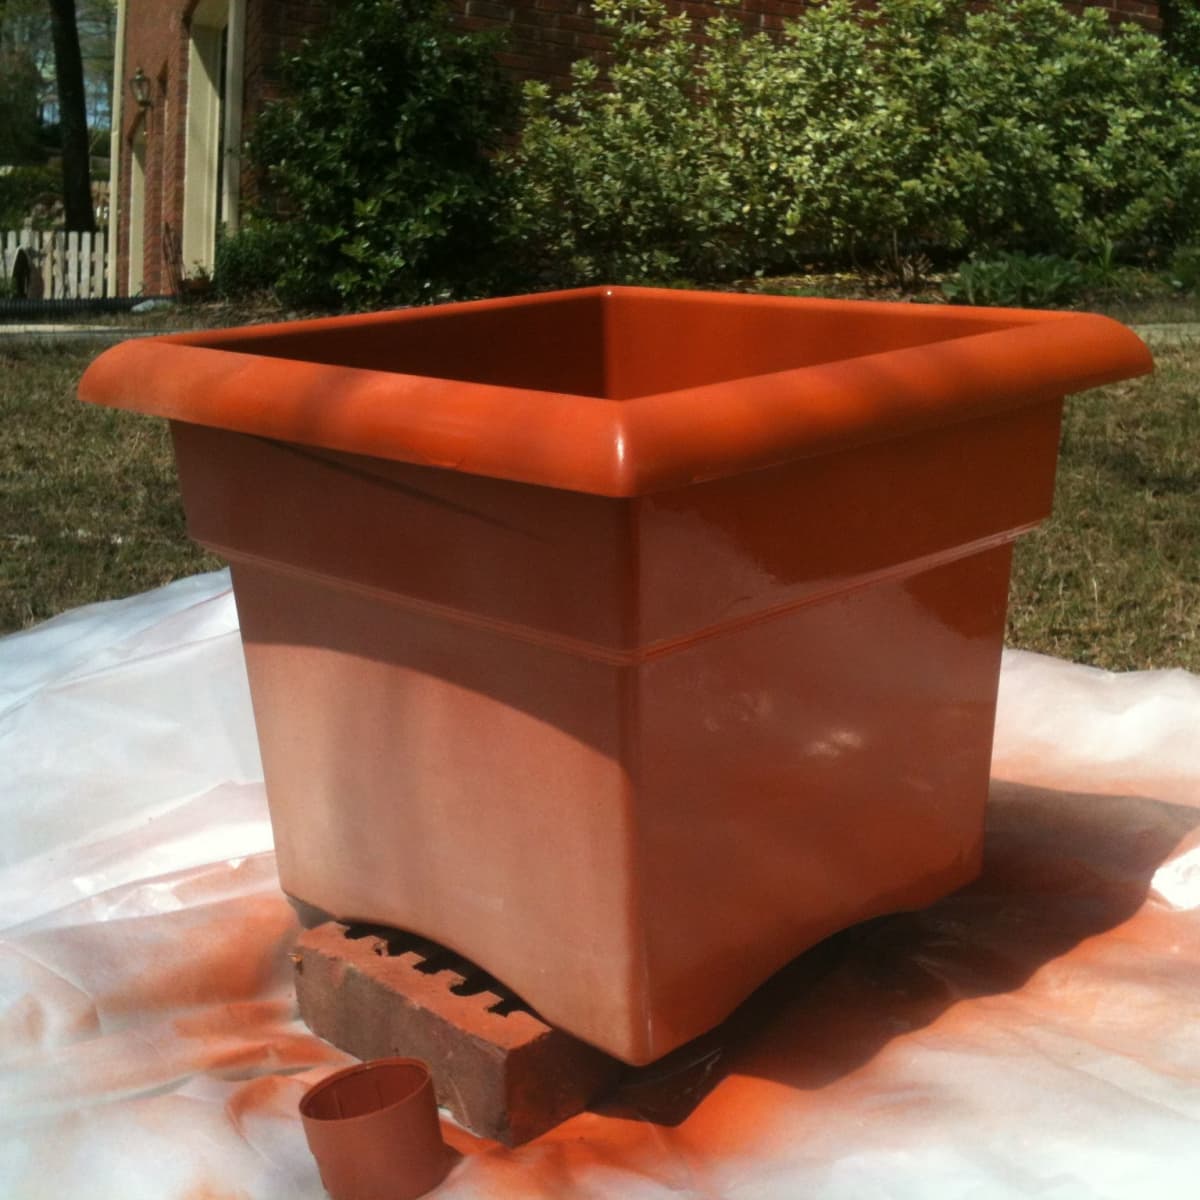 How to Spray Paint Plastic Planters in 7 Easy Steps